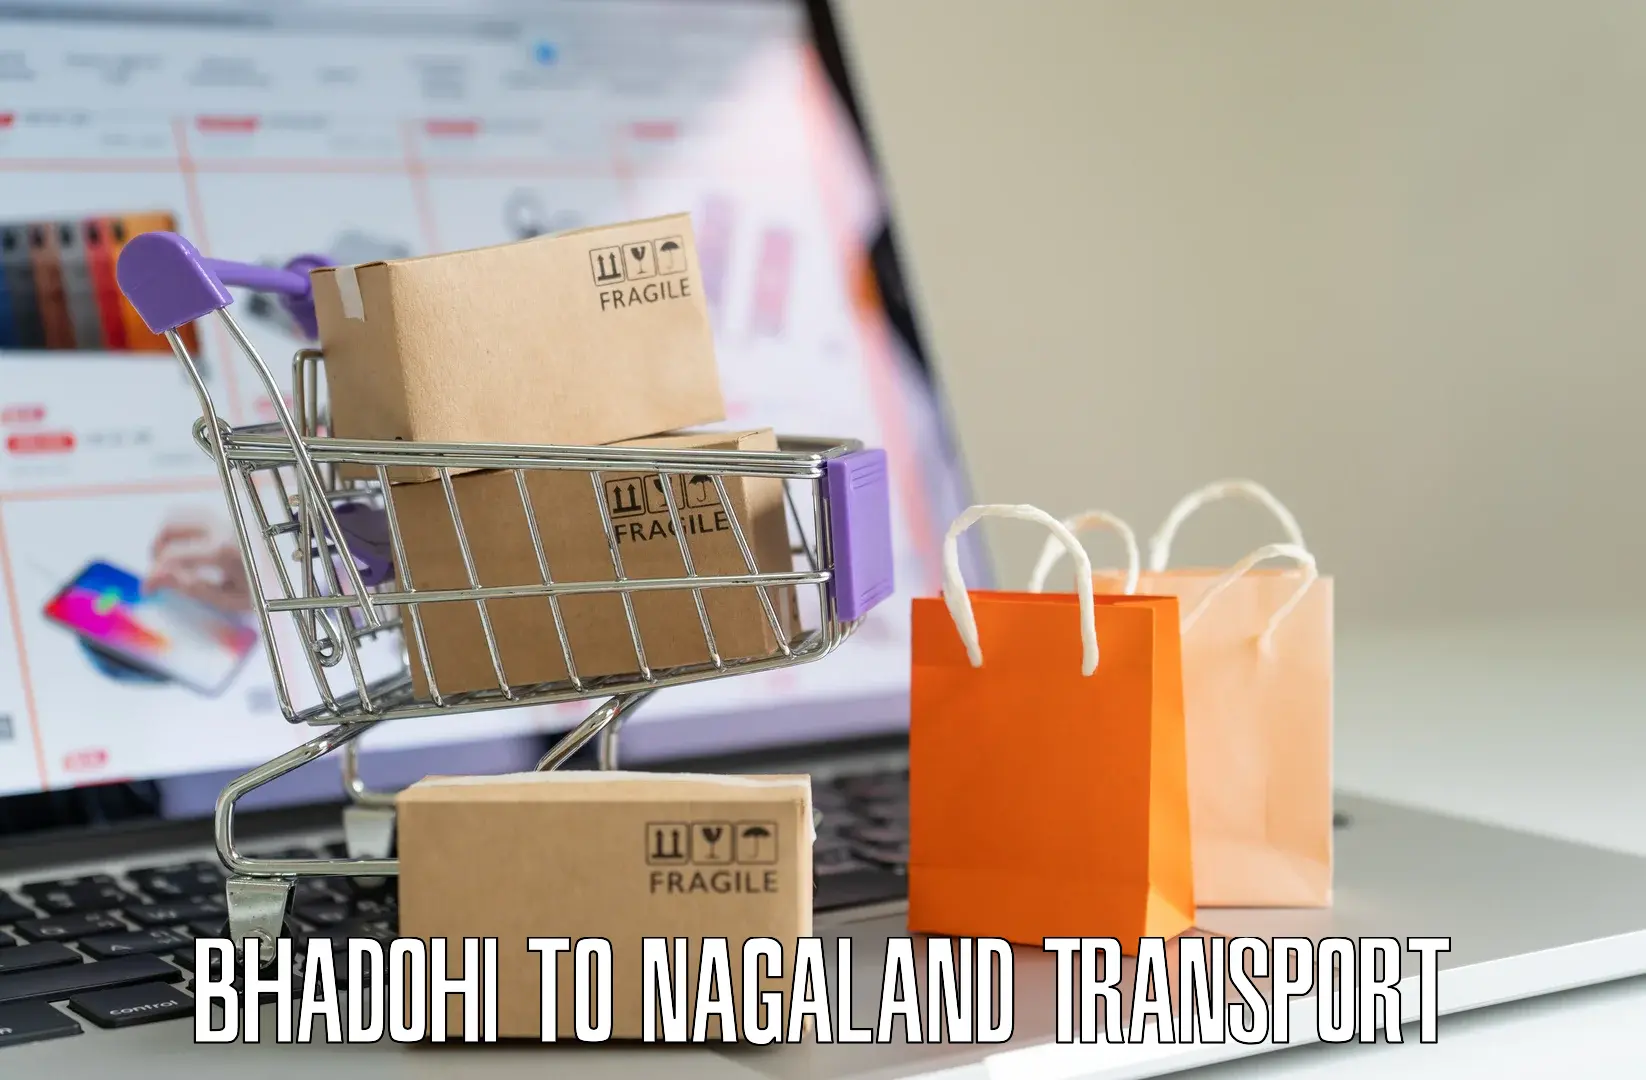 Transport shared services Bhadohi to Nagaland